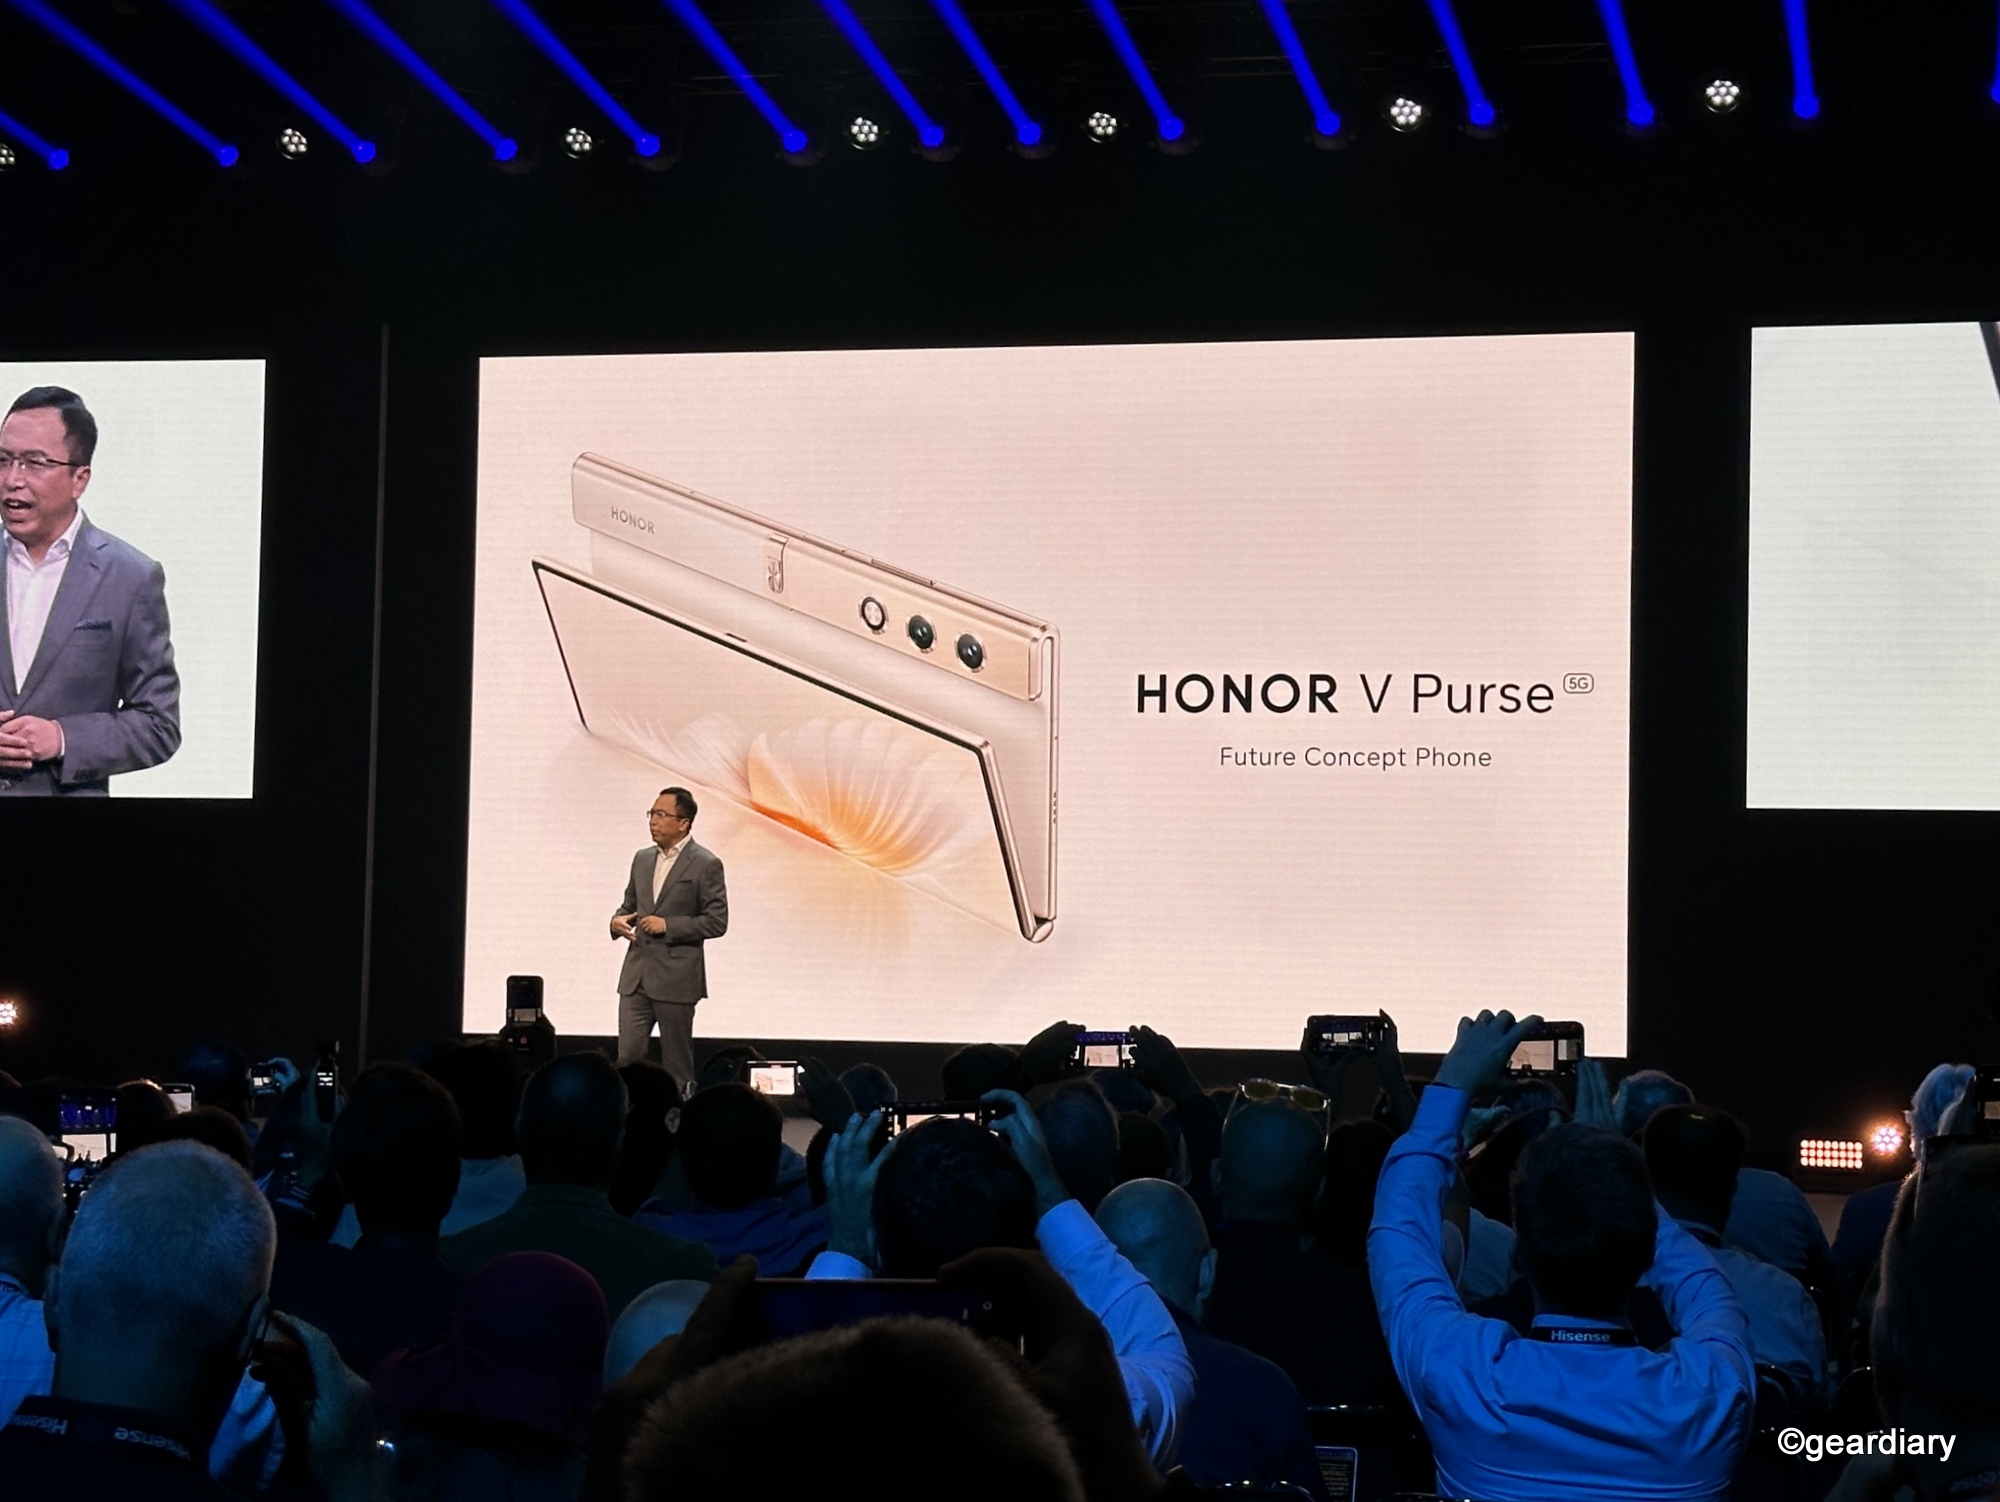 UPDATED: At IFA, the Honor Magic V2 Impressed As the V Purse